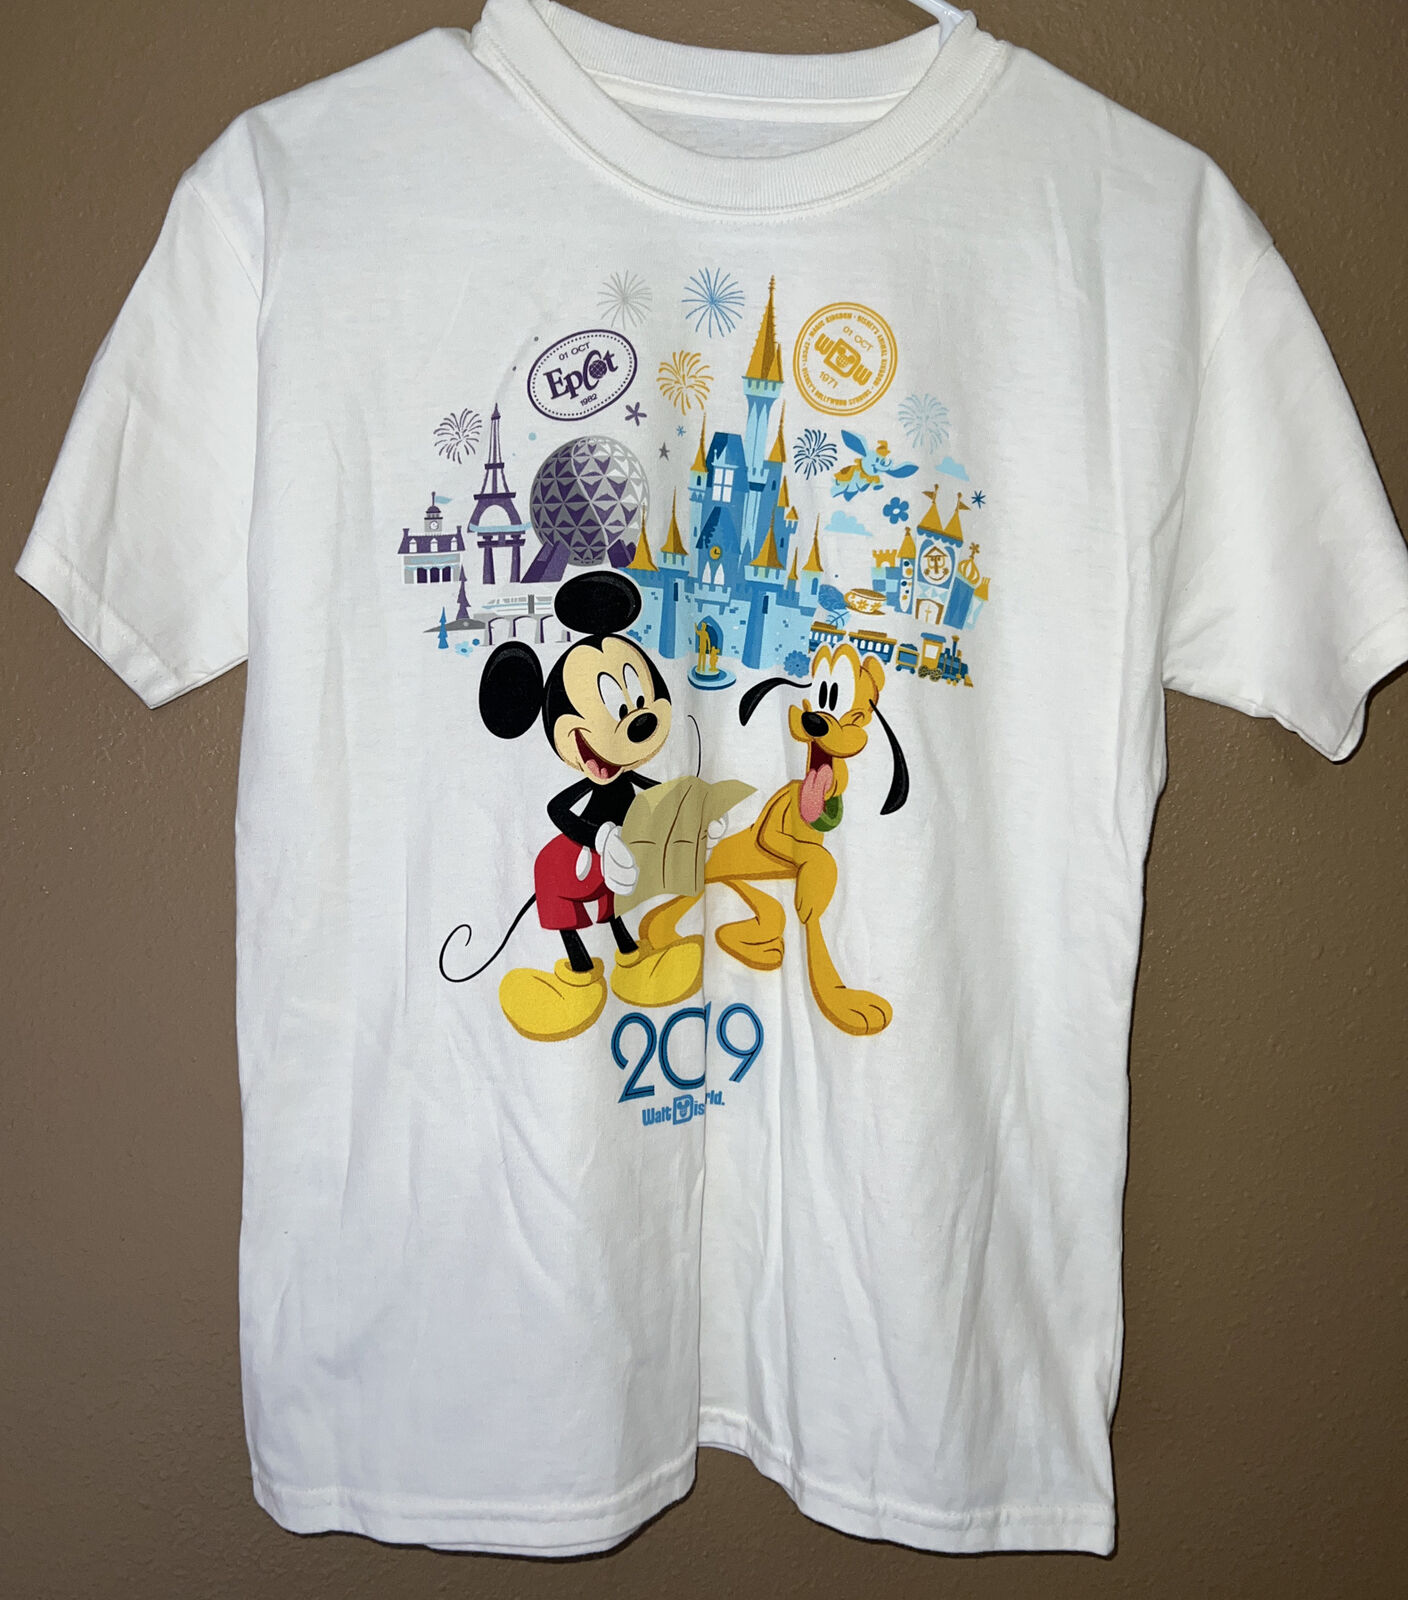 WDW~Mickey Mouse and Friends~T-Shirt for Kids – Walt Disney World 2019~ NWOT